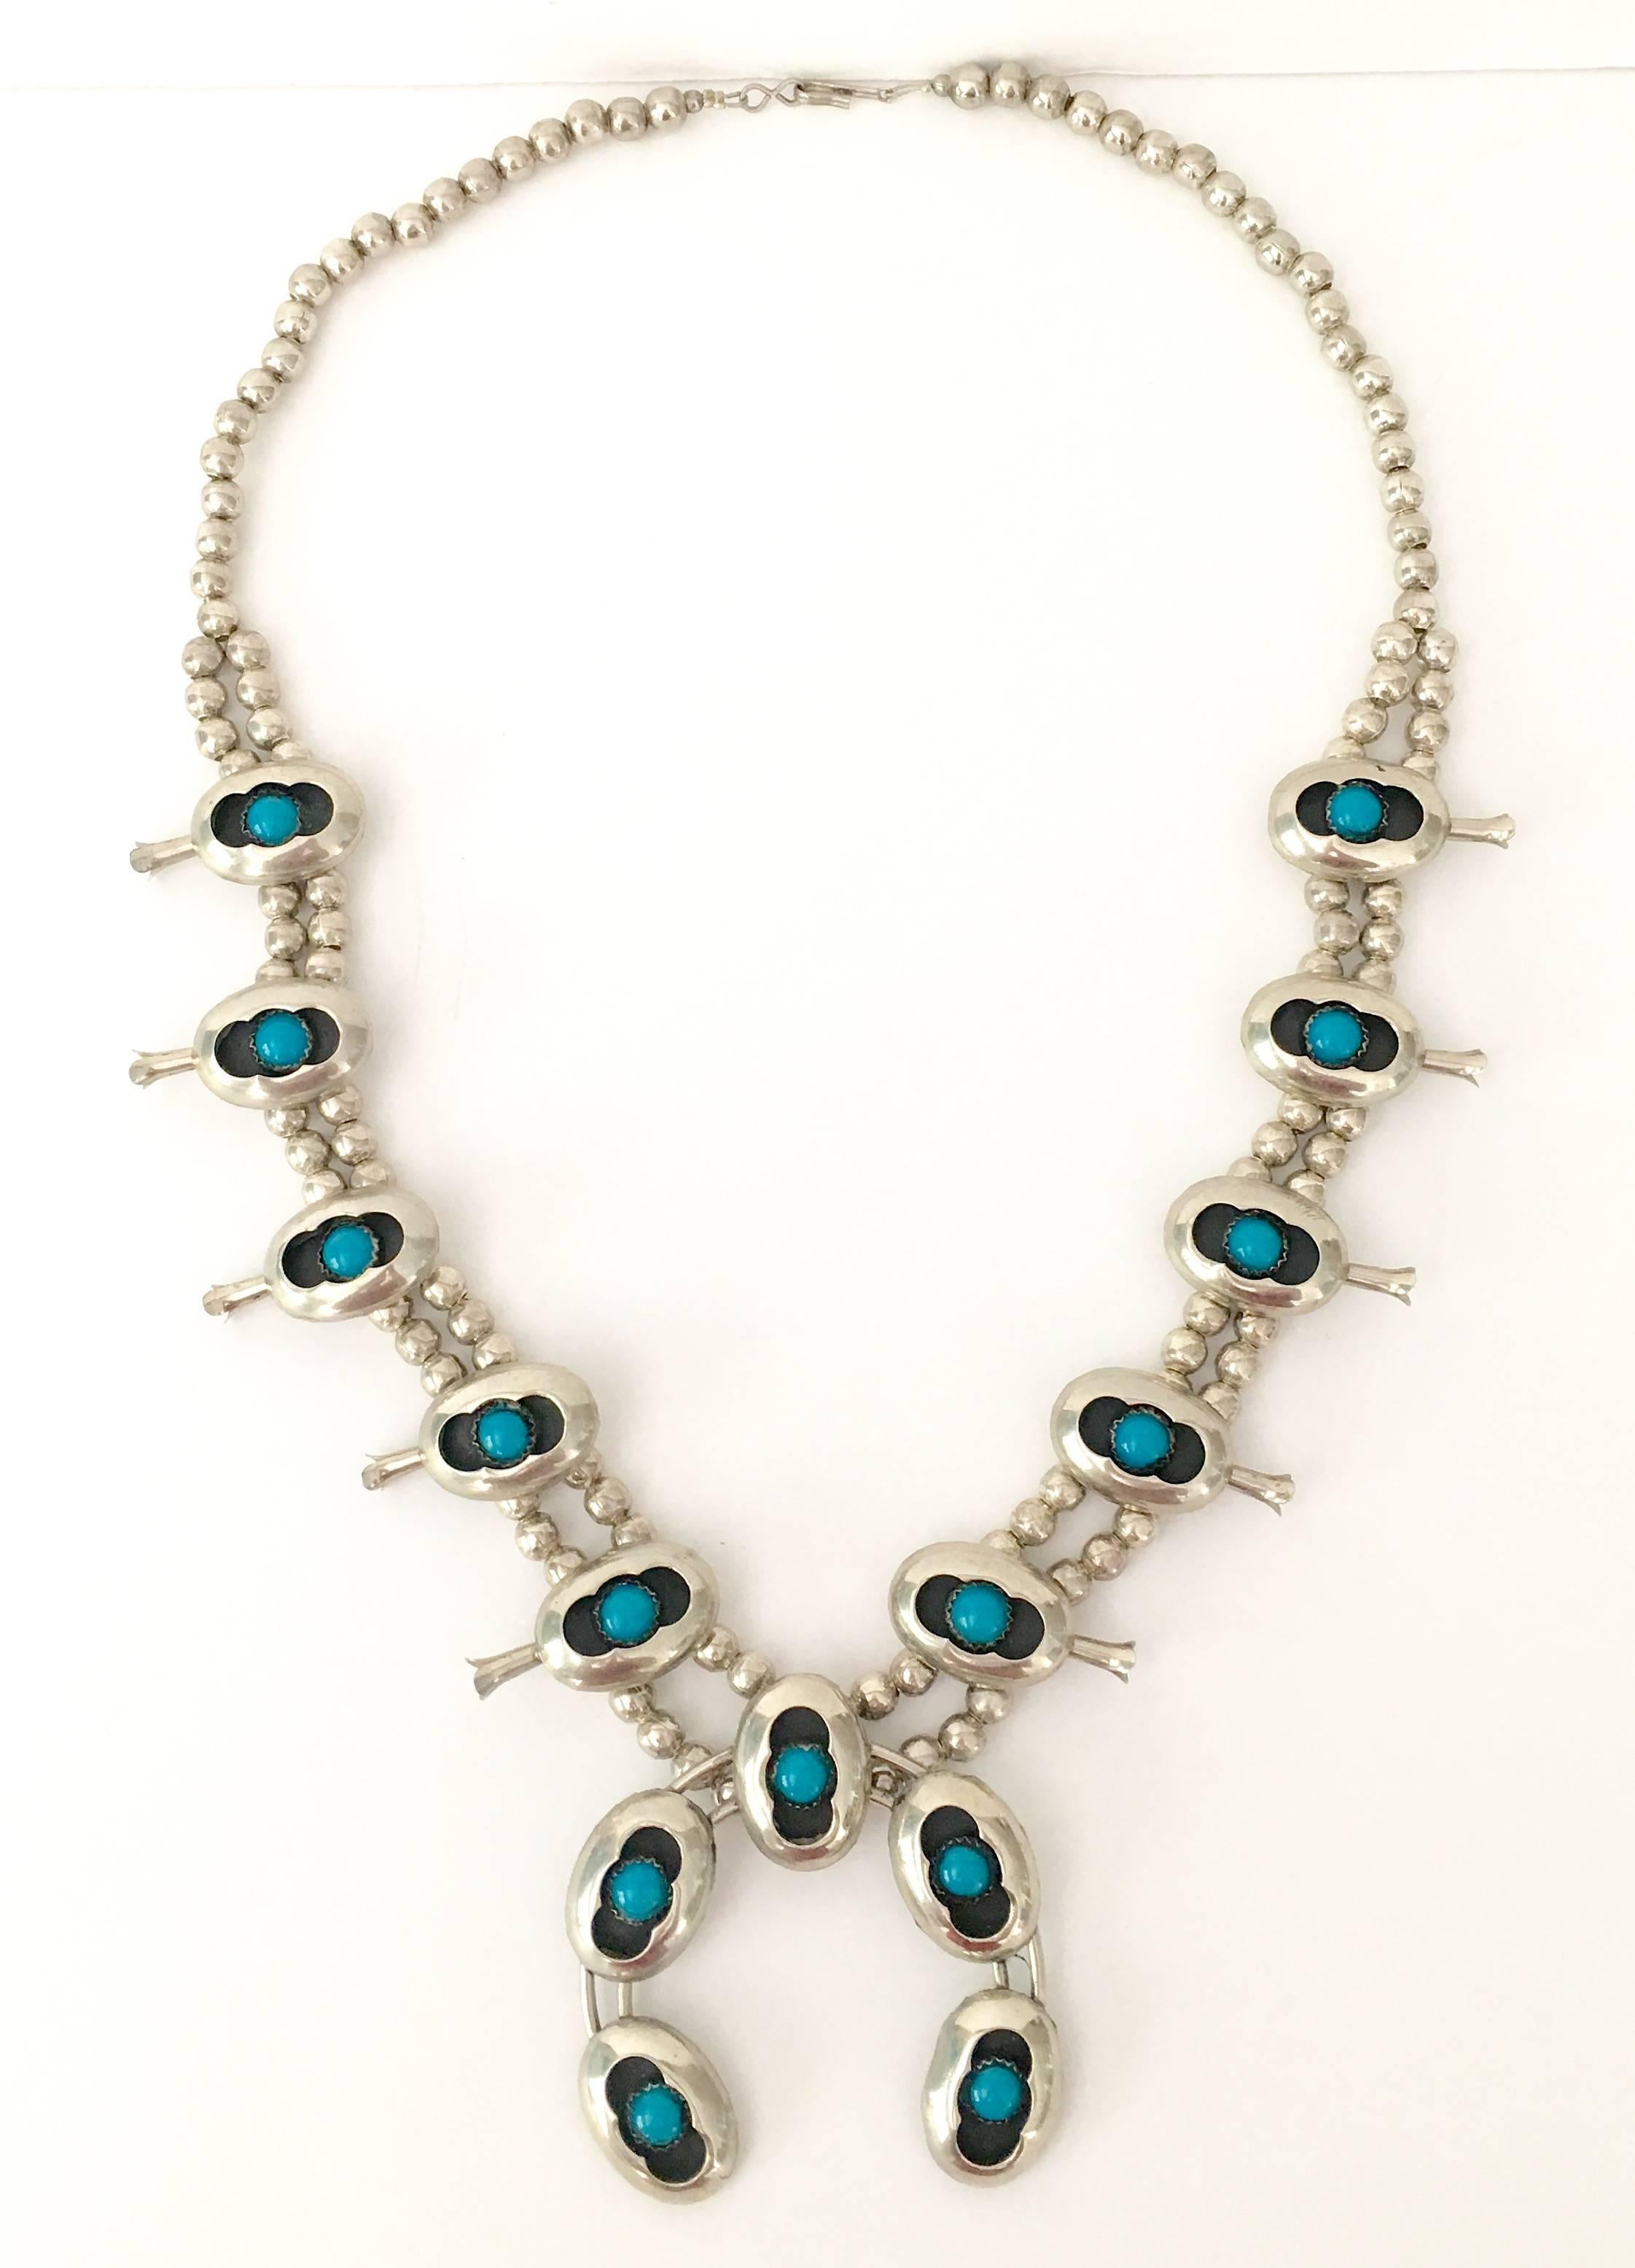 Vintage Navajo sterling silver and turquoise shadow box set Naja squash blossom necklace. 15 quarter inch turquoise stone throughout. Ten small "Naja" and one large center "Naja" on a double sterling silver bead necklace. The